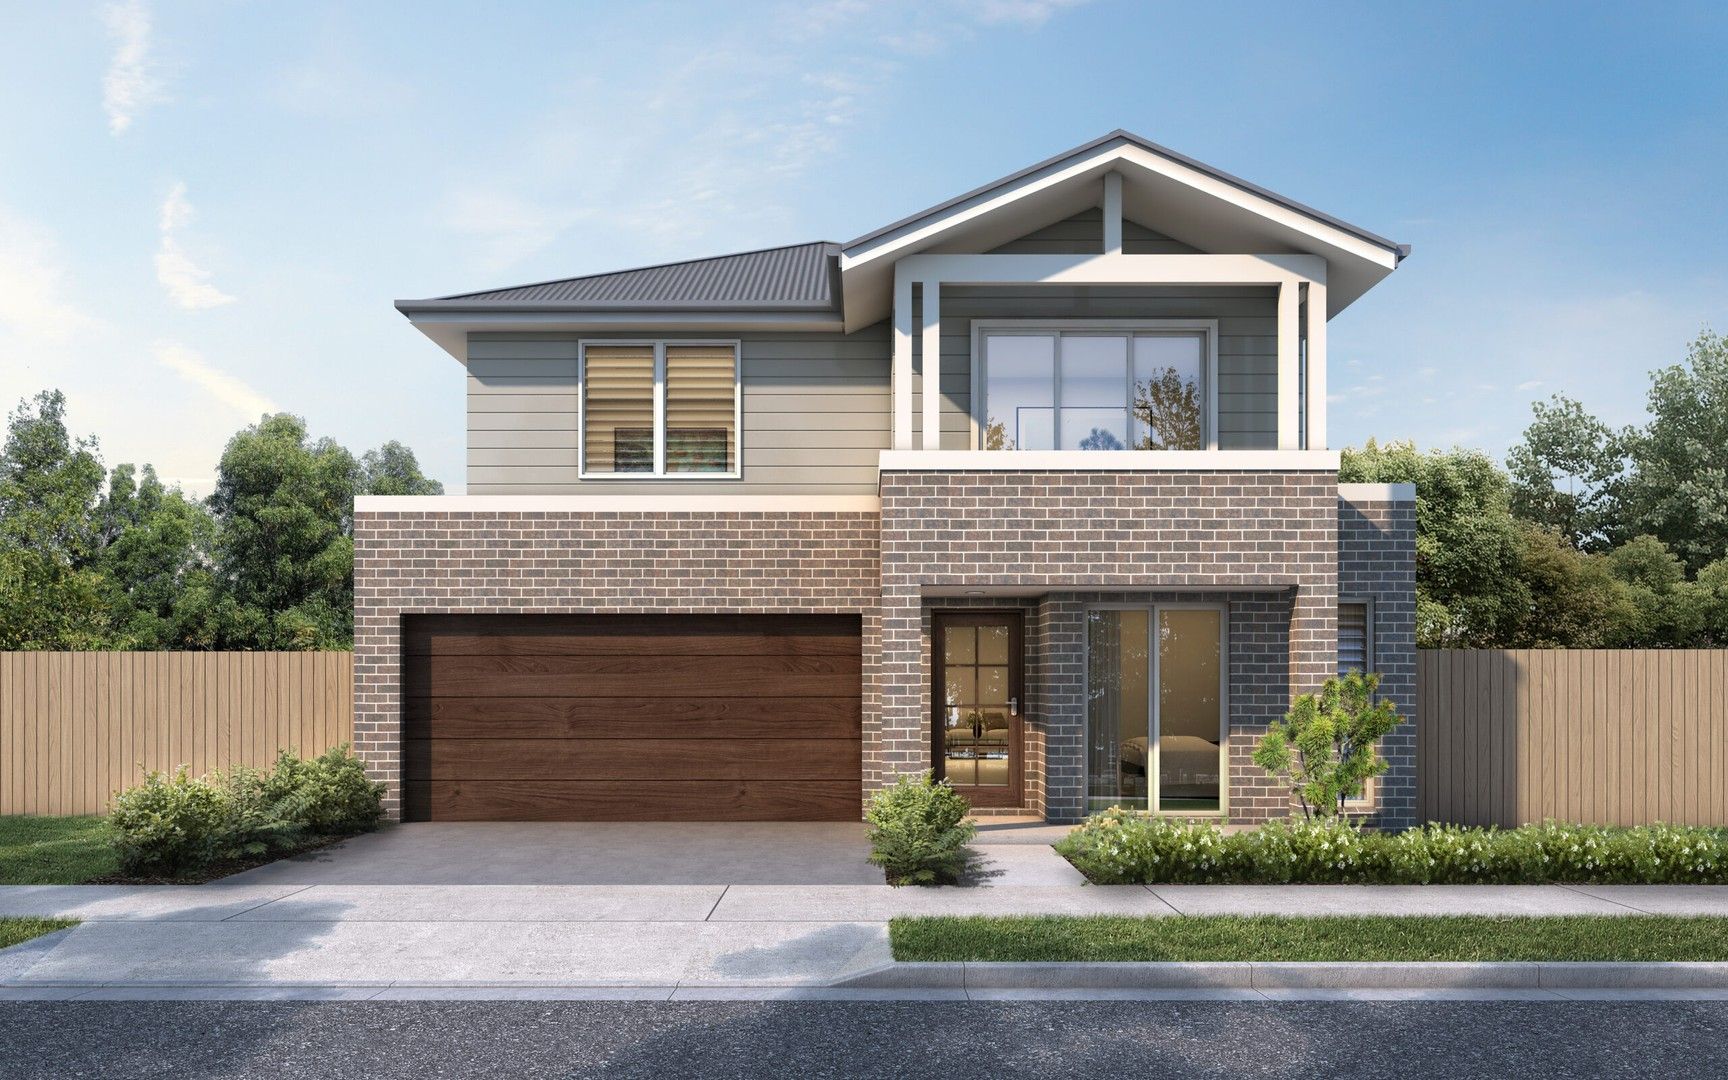 5 bedrooms New House & Land in Lot 22 Ballandean Boulevard GLEDSWOOD HILLS NSW, 2557